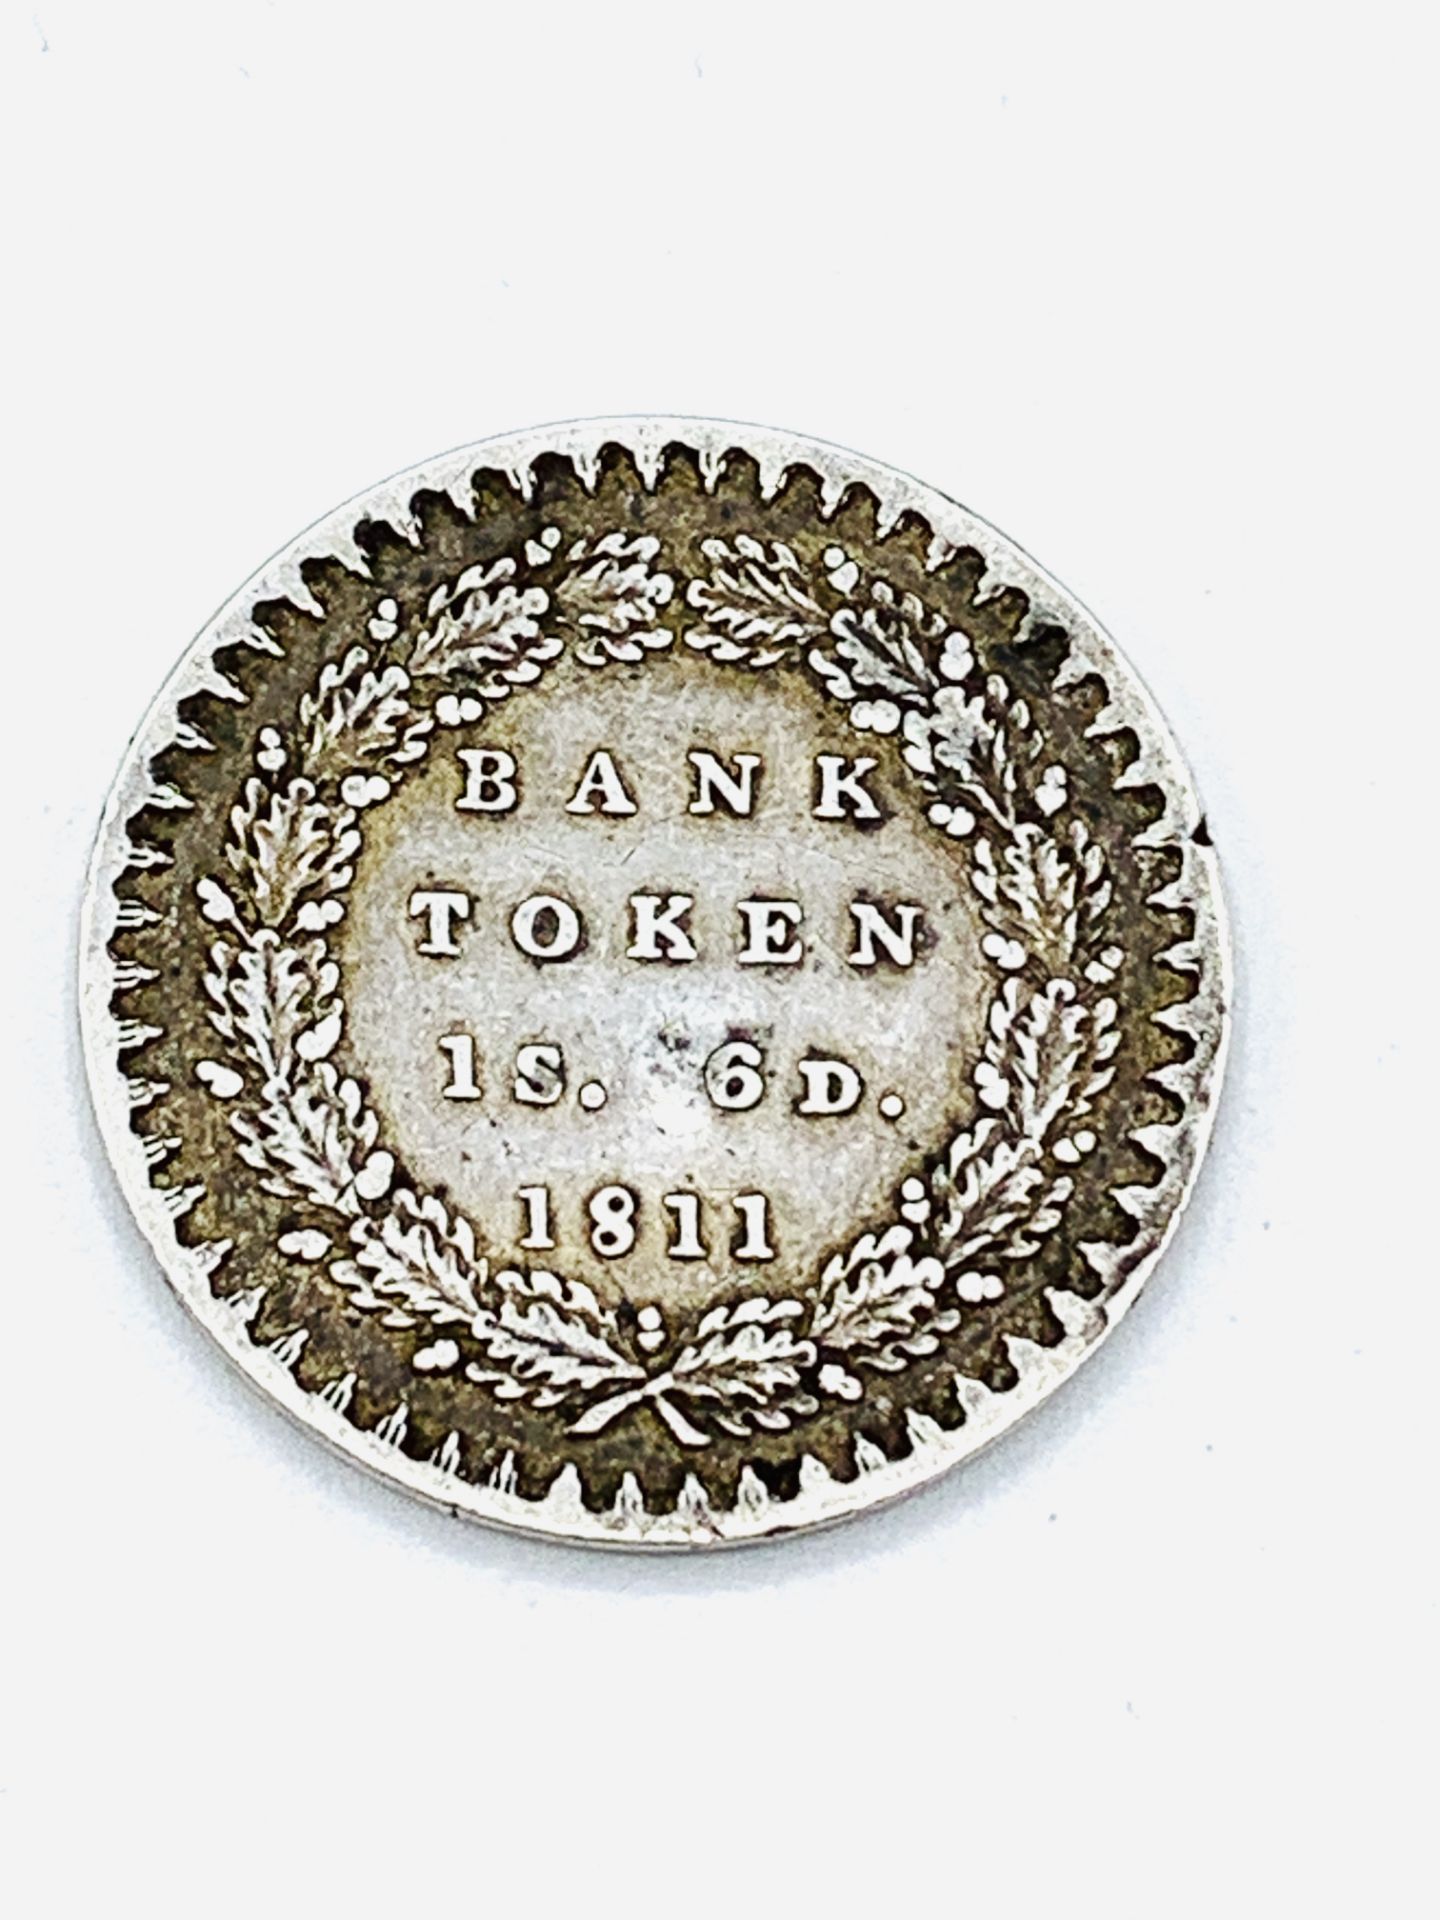 George III silver Bank Token for 1 shilling and 6 pence - Image 2 of 2